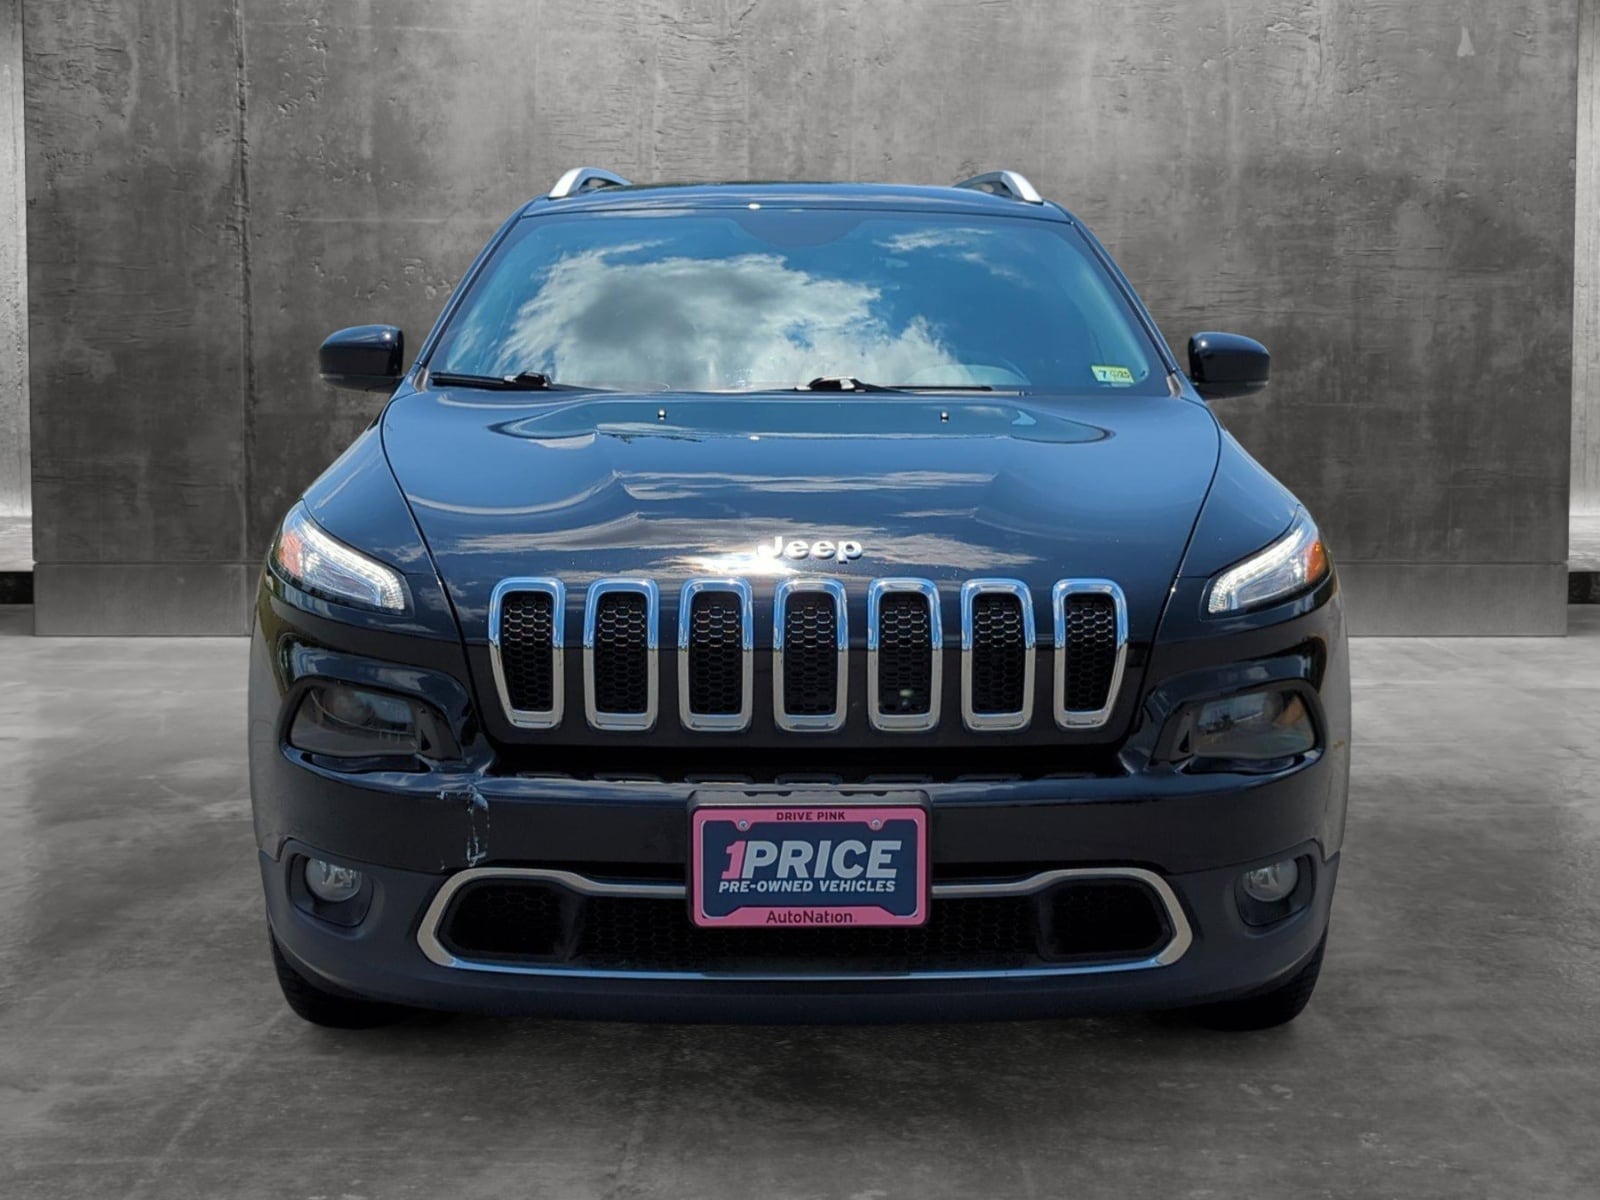 Used 2018 Jeep Cherokee Limited with VIN 1C4PJMDX0JD525404 for sale in Leesburg, VA